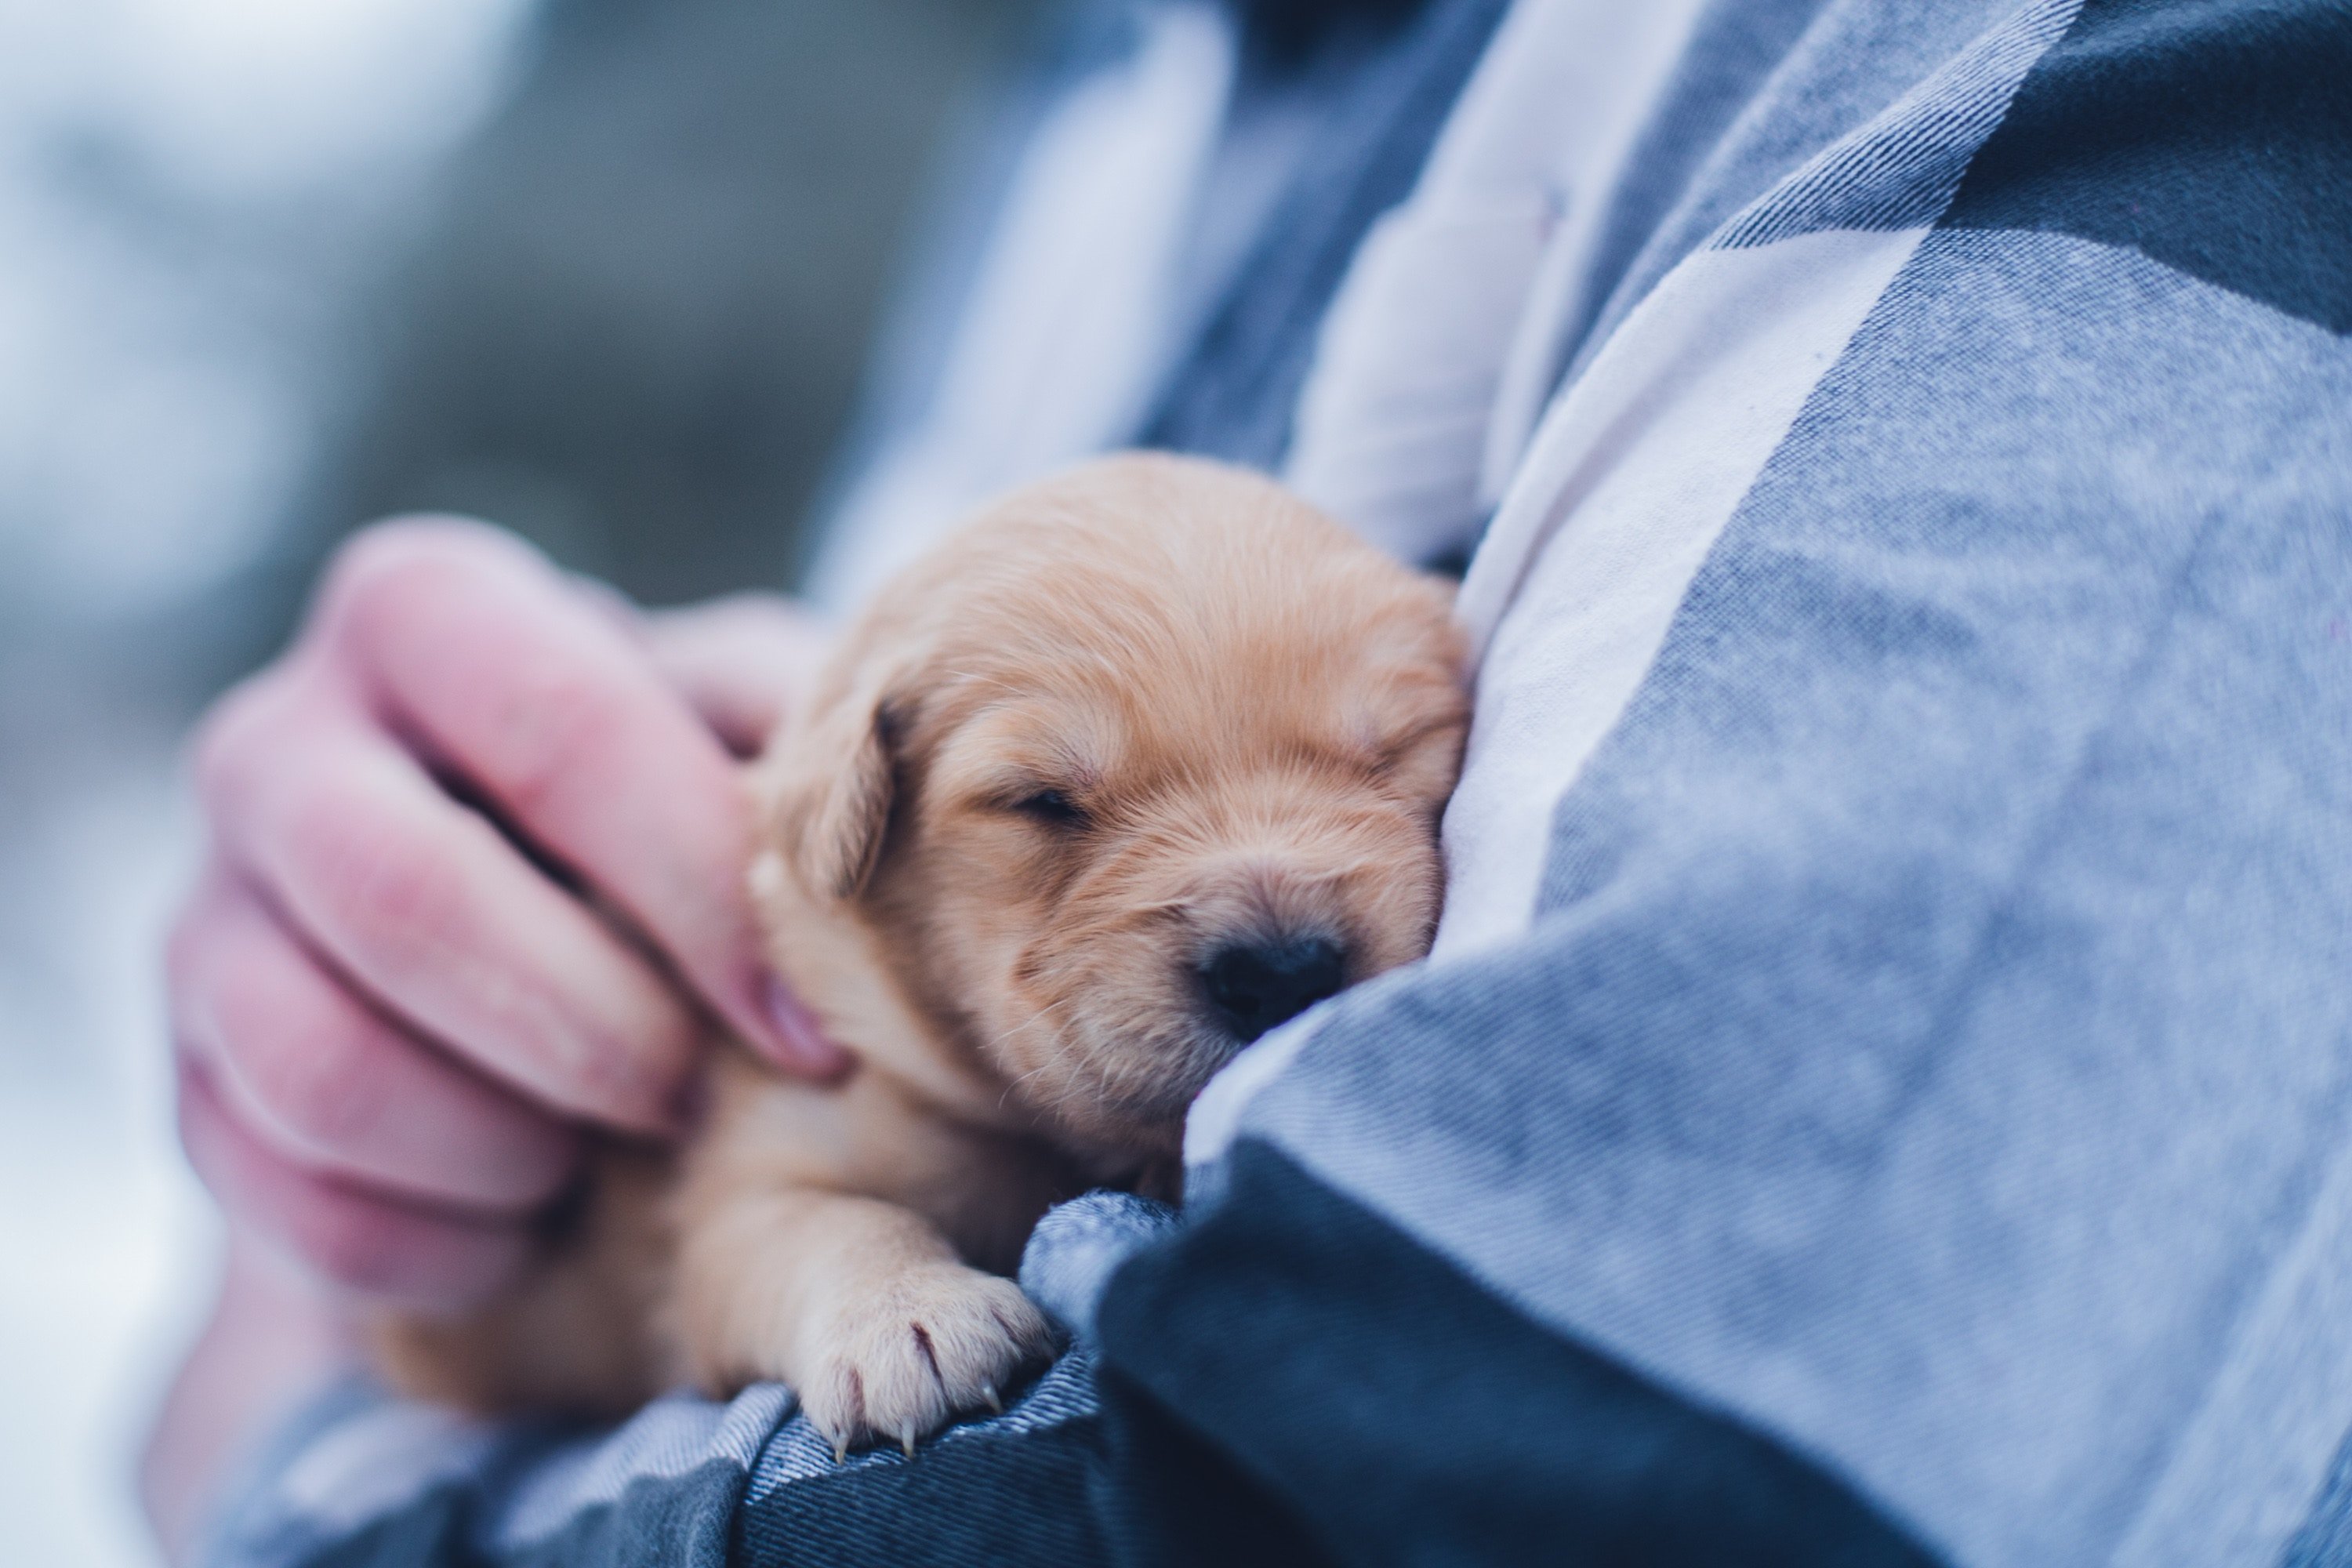 Just taking a little snooze. Photograph by Lydia Torrey via Unsplash.